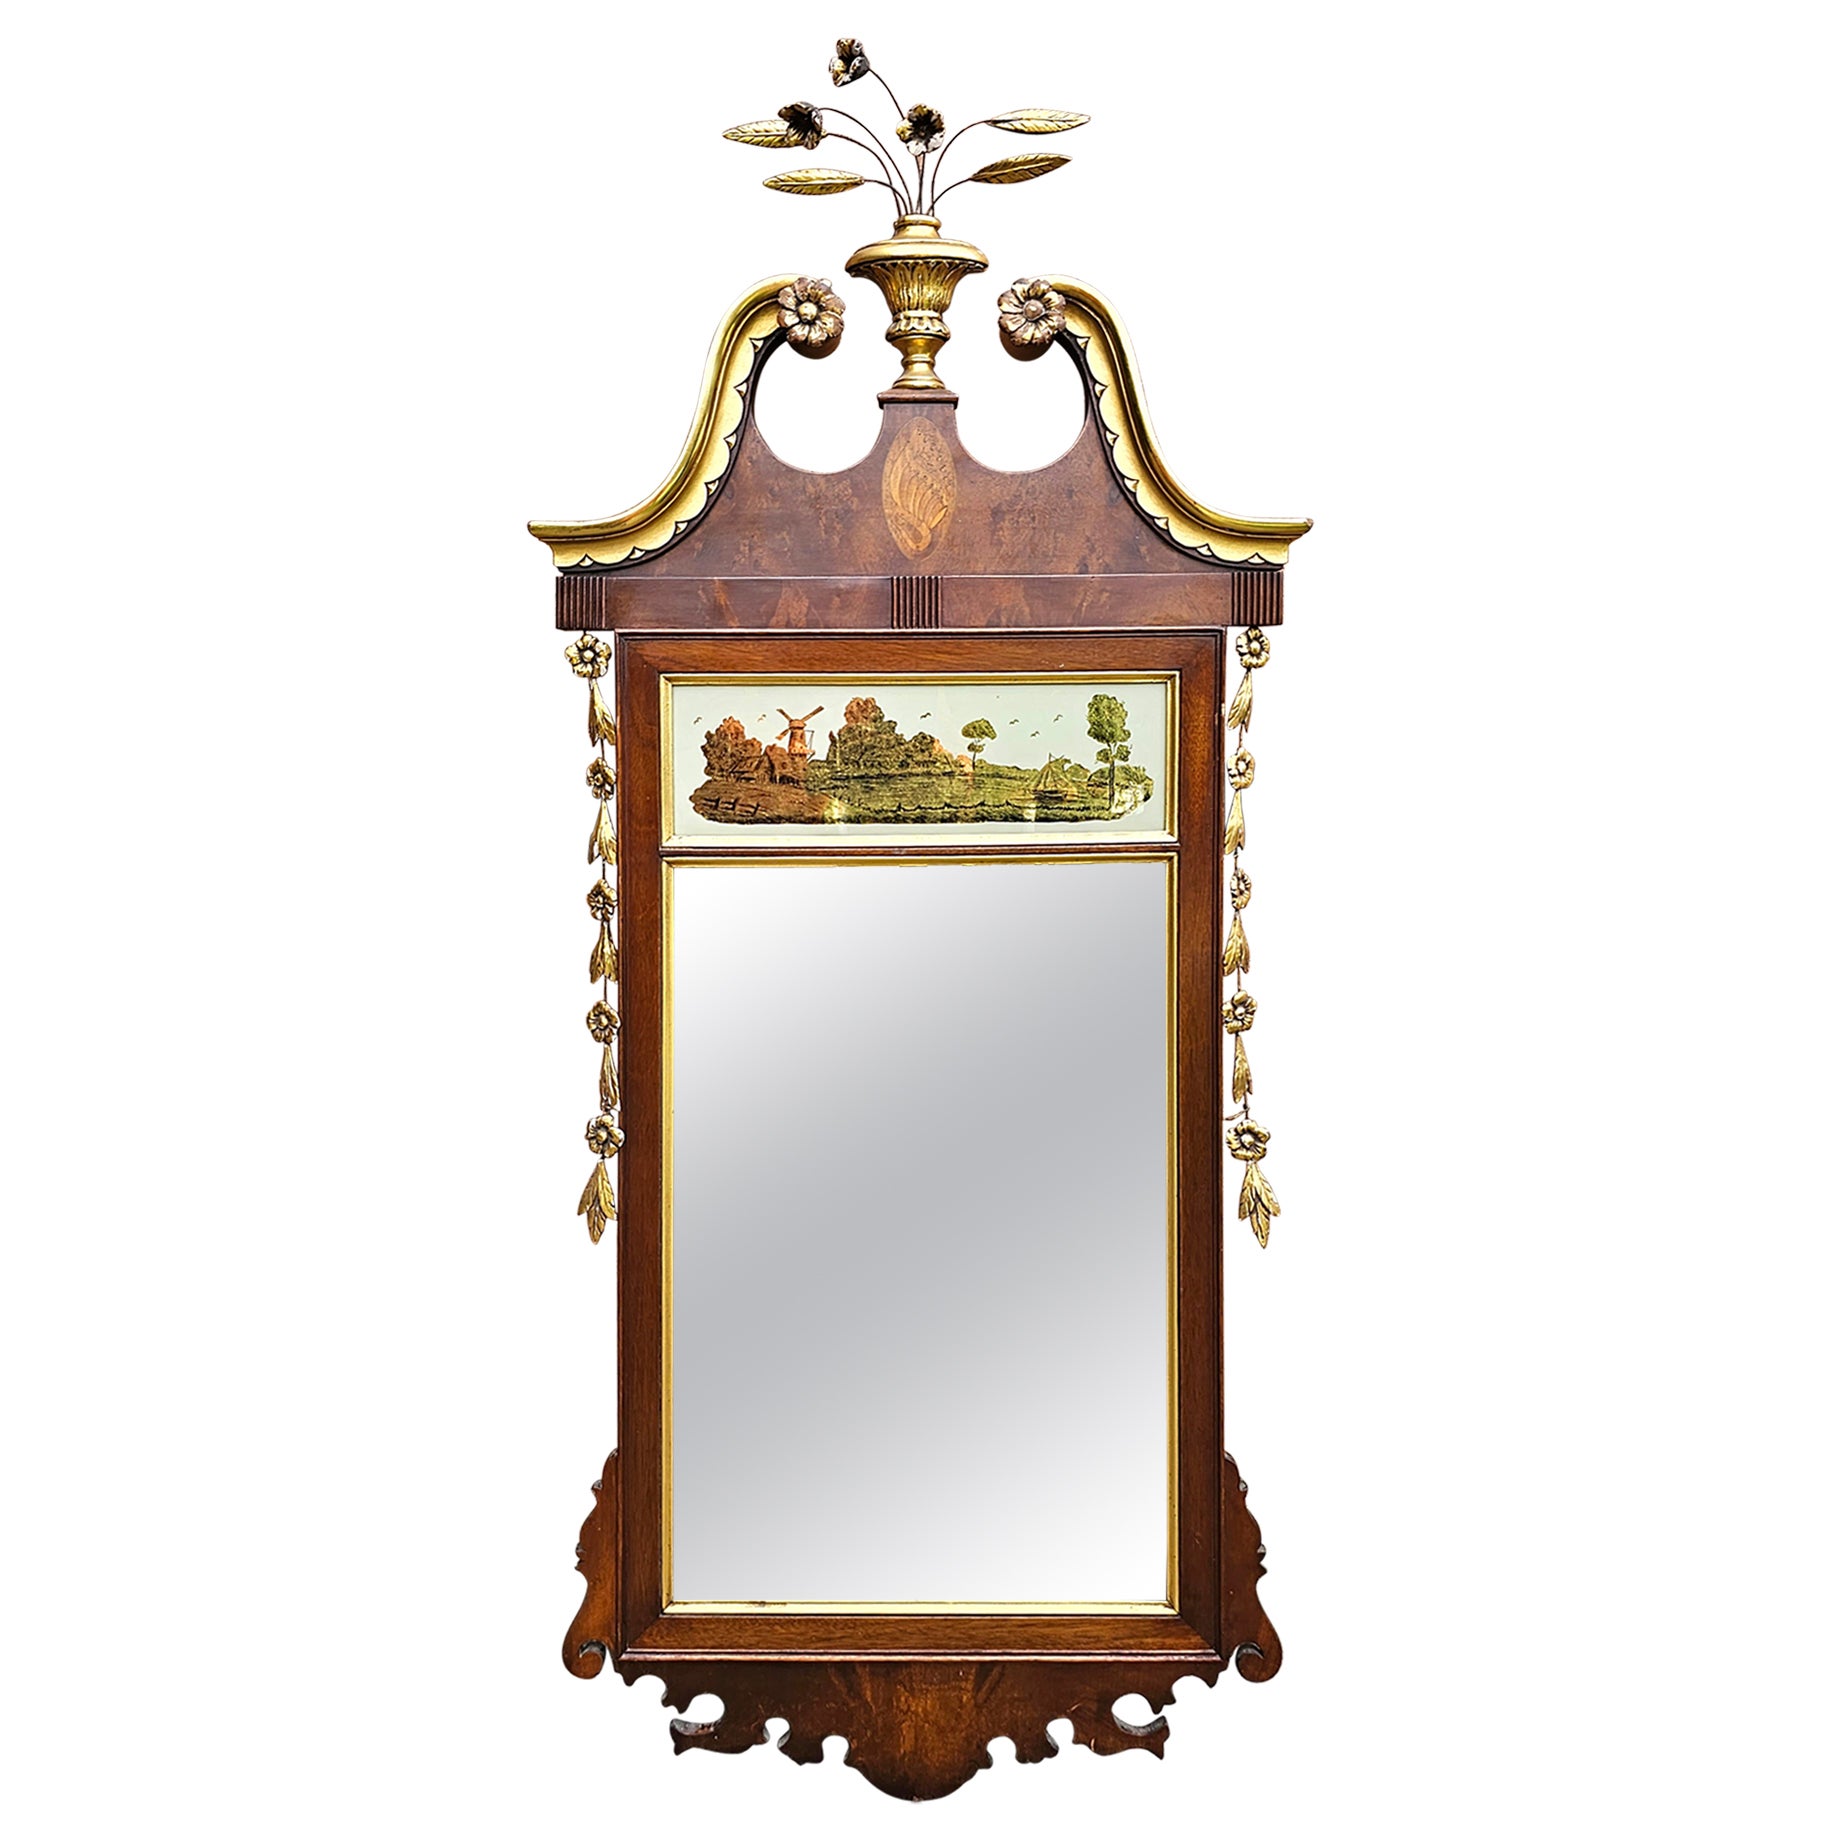 Federal Satinwood Inlaid Carved Mahogany Parcel Gilt And Eglomise Painted Mirror For Sale